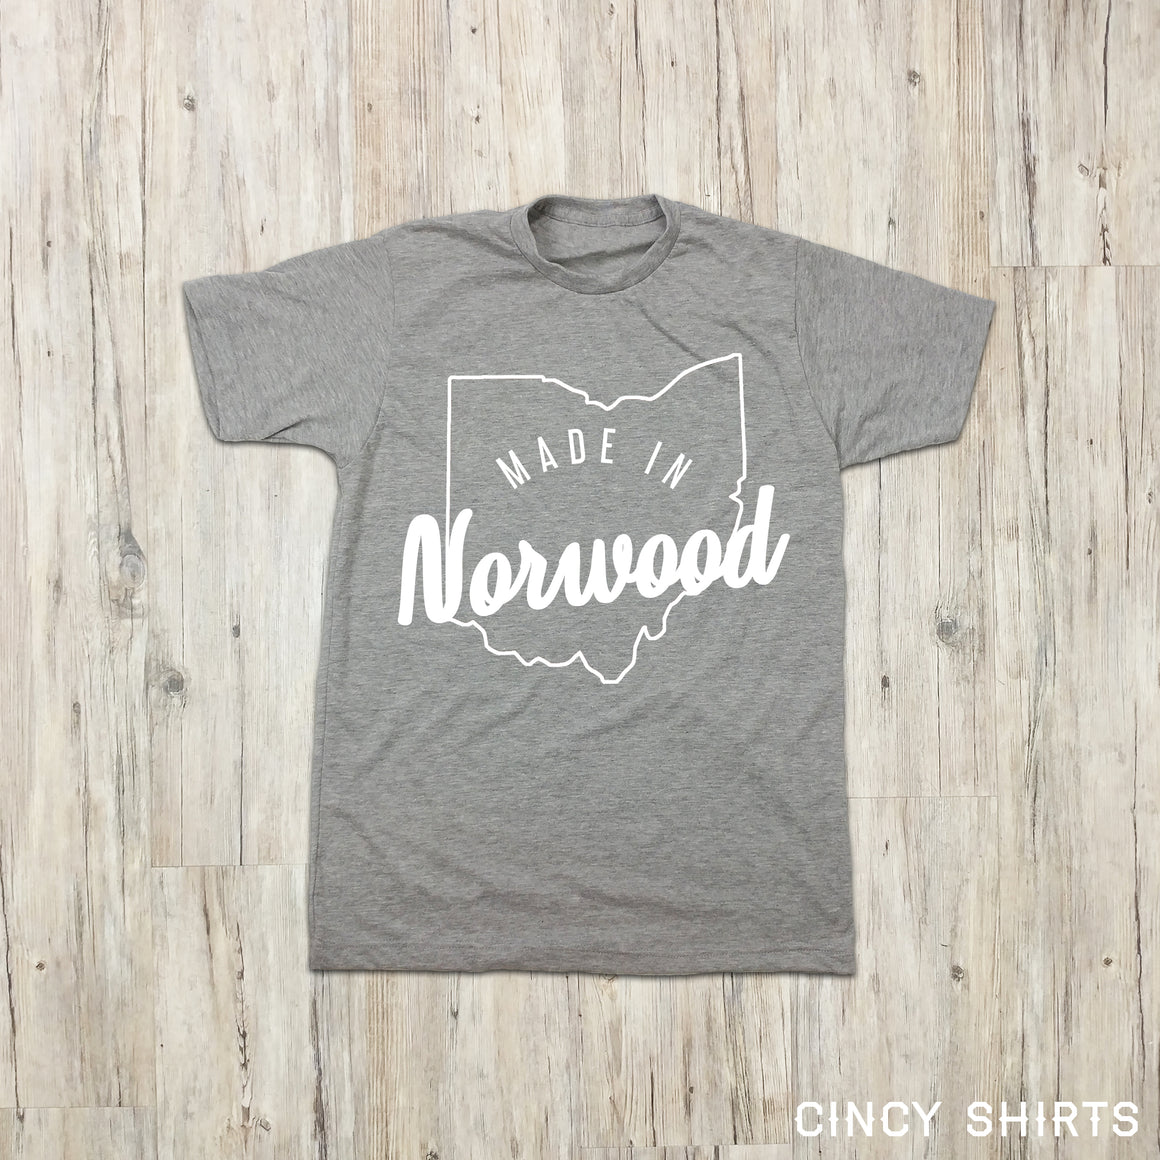 Made In Norwood - Cincy Shirts